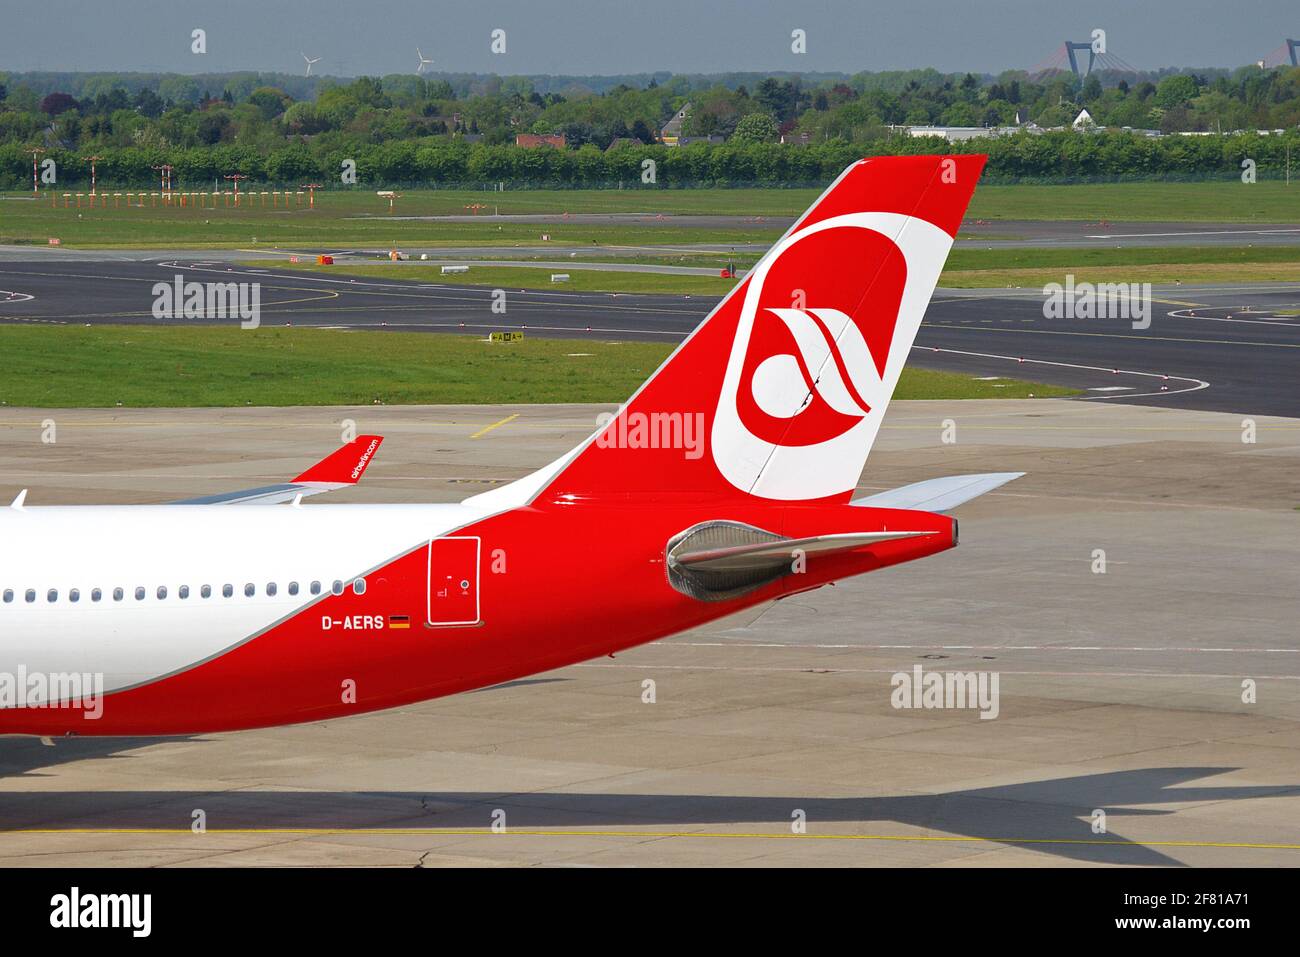 Düsseldorf, Germany - May 03, 2008: Aircraft tail of Airbus A330-300 of Air Berlin at the airport of Düsseldorf Stock Photo